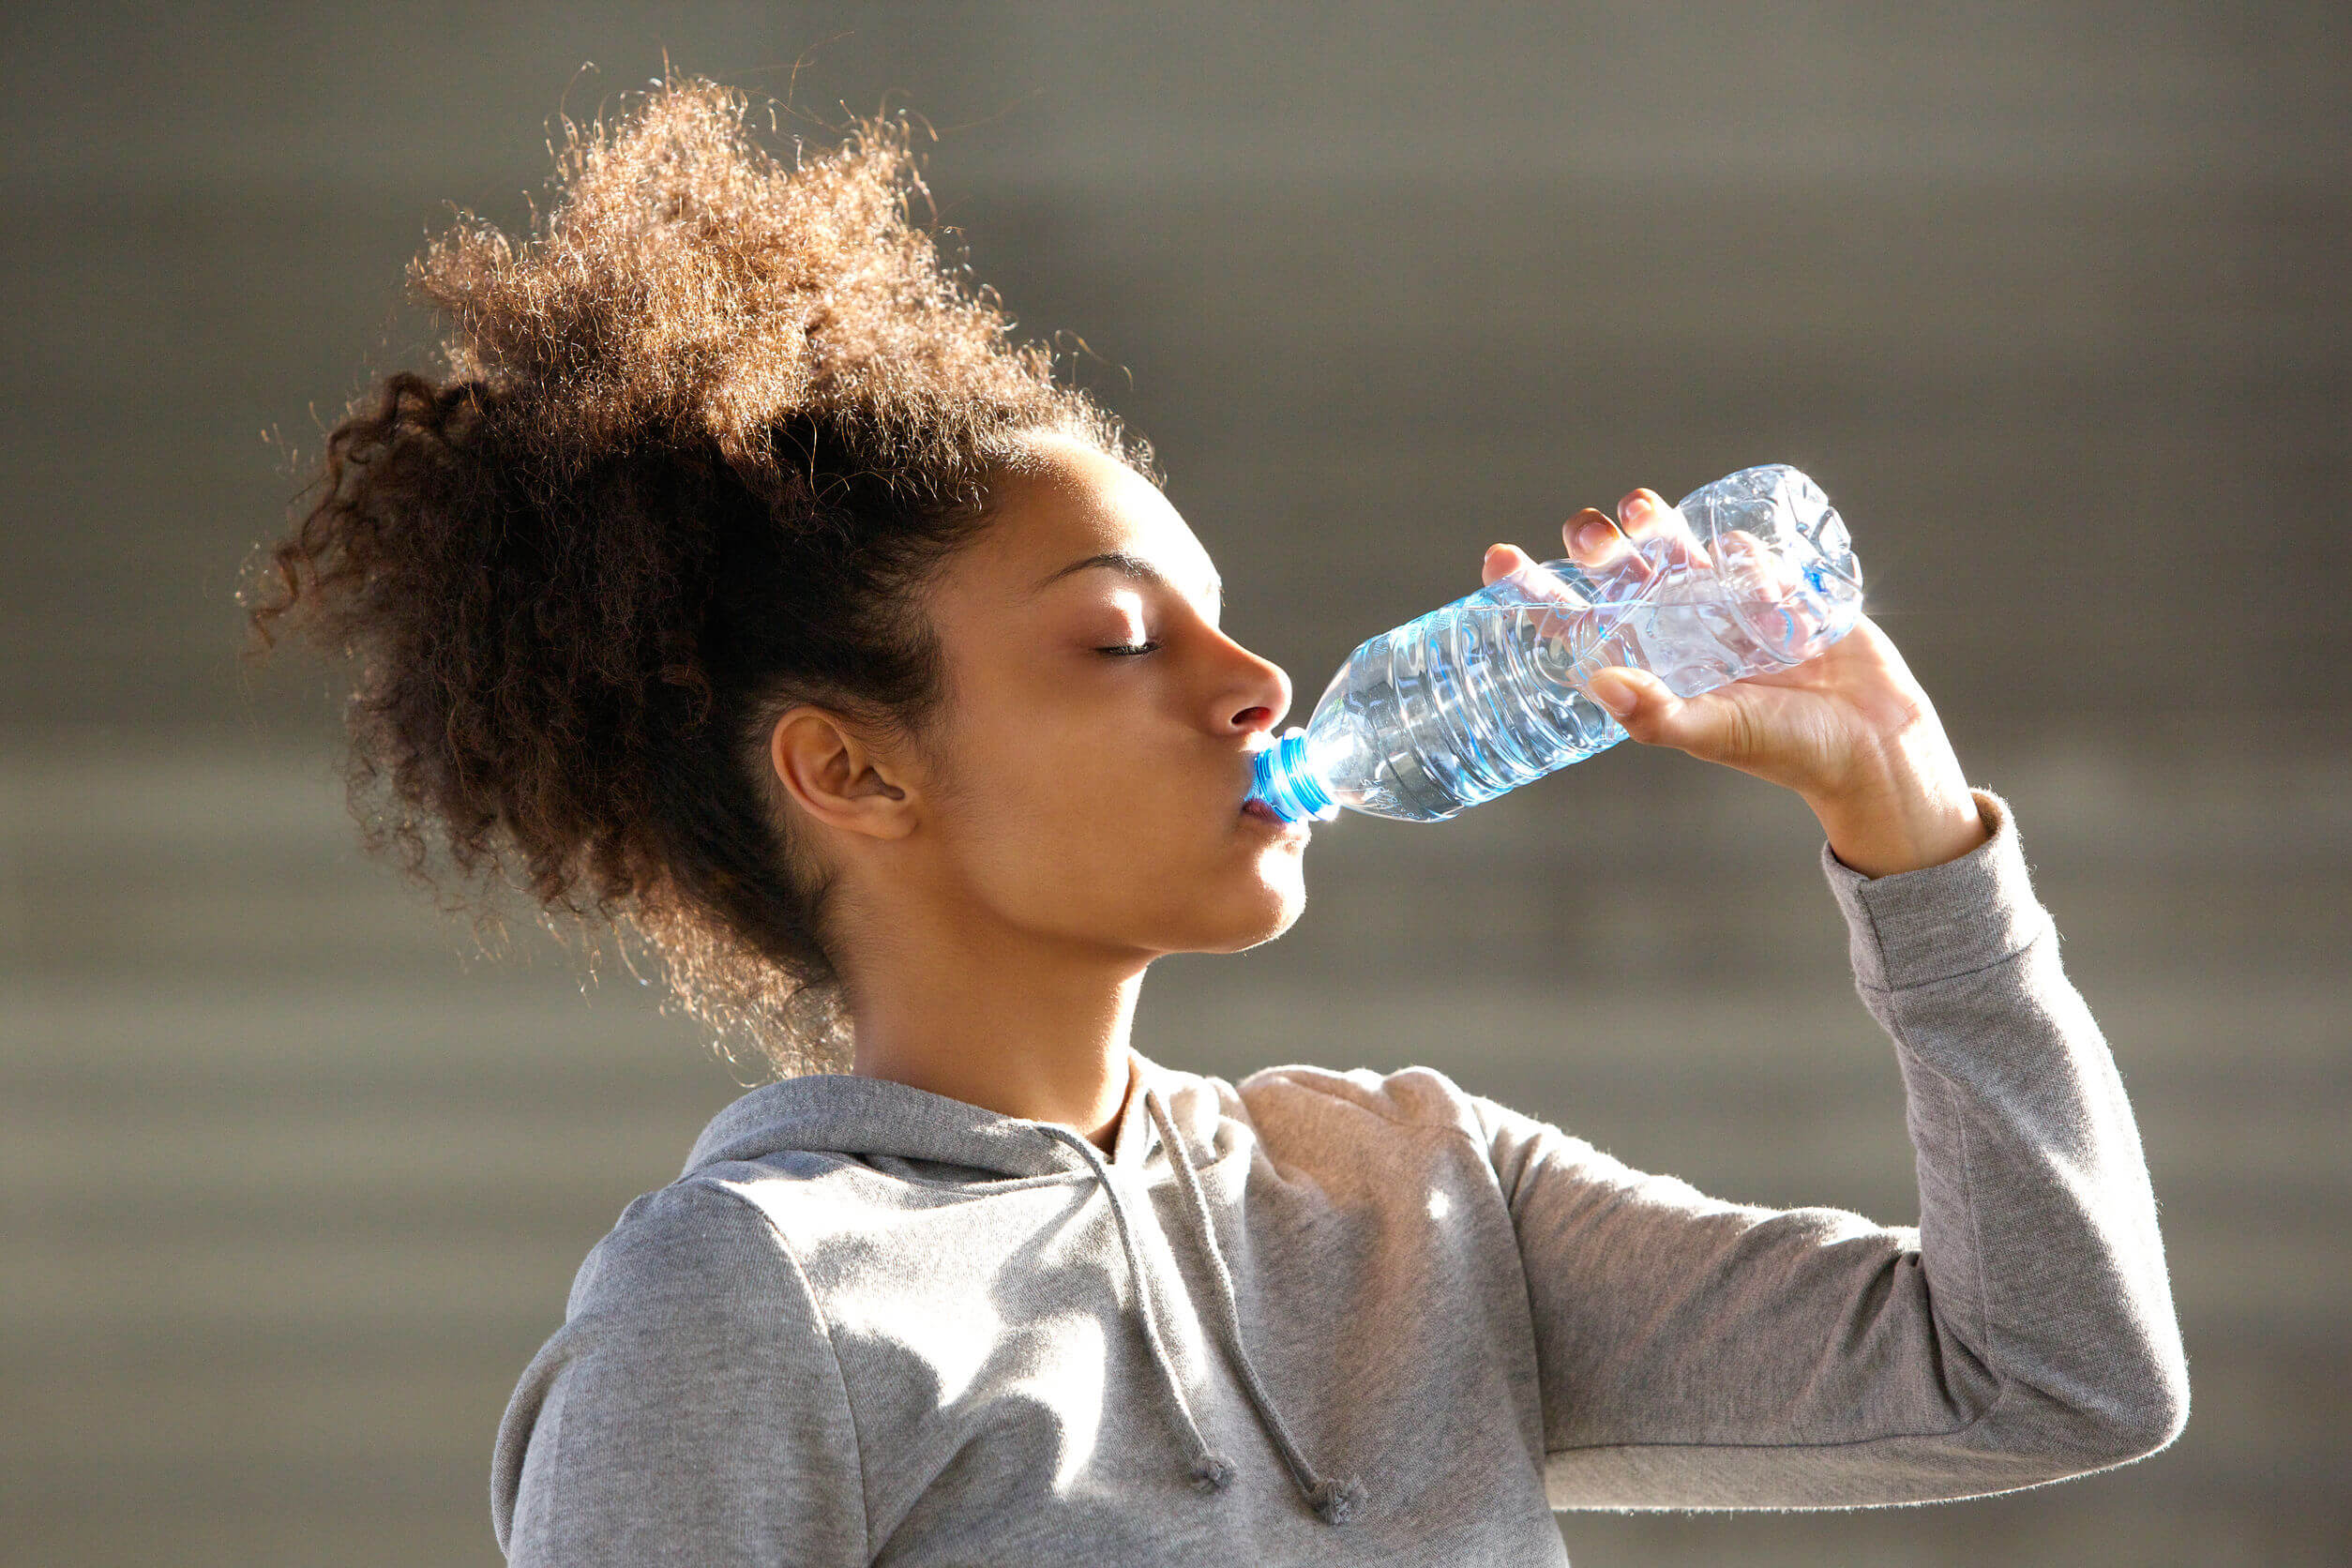 A tip for taking care of your skin in cold weather is constant hydration, especially when exercising.